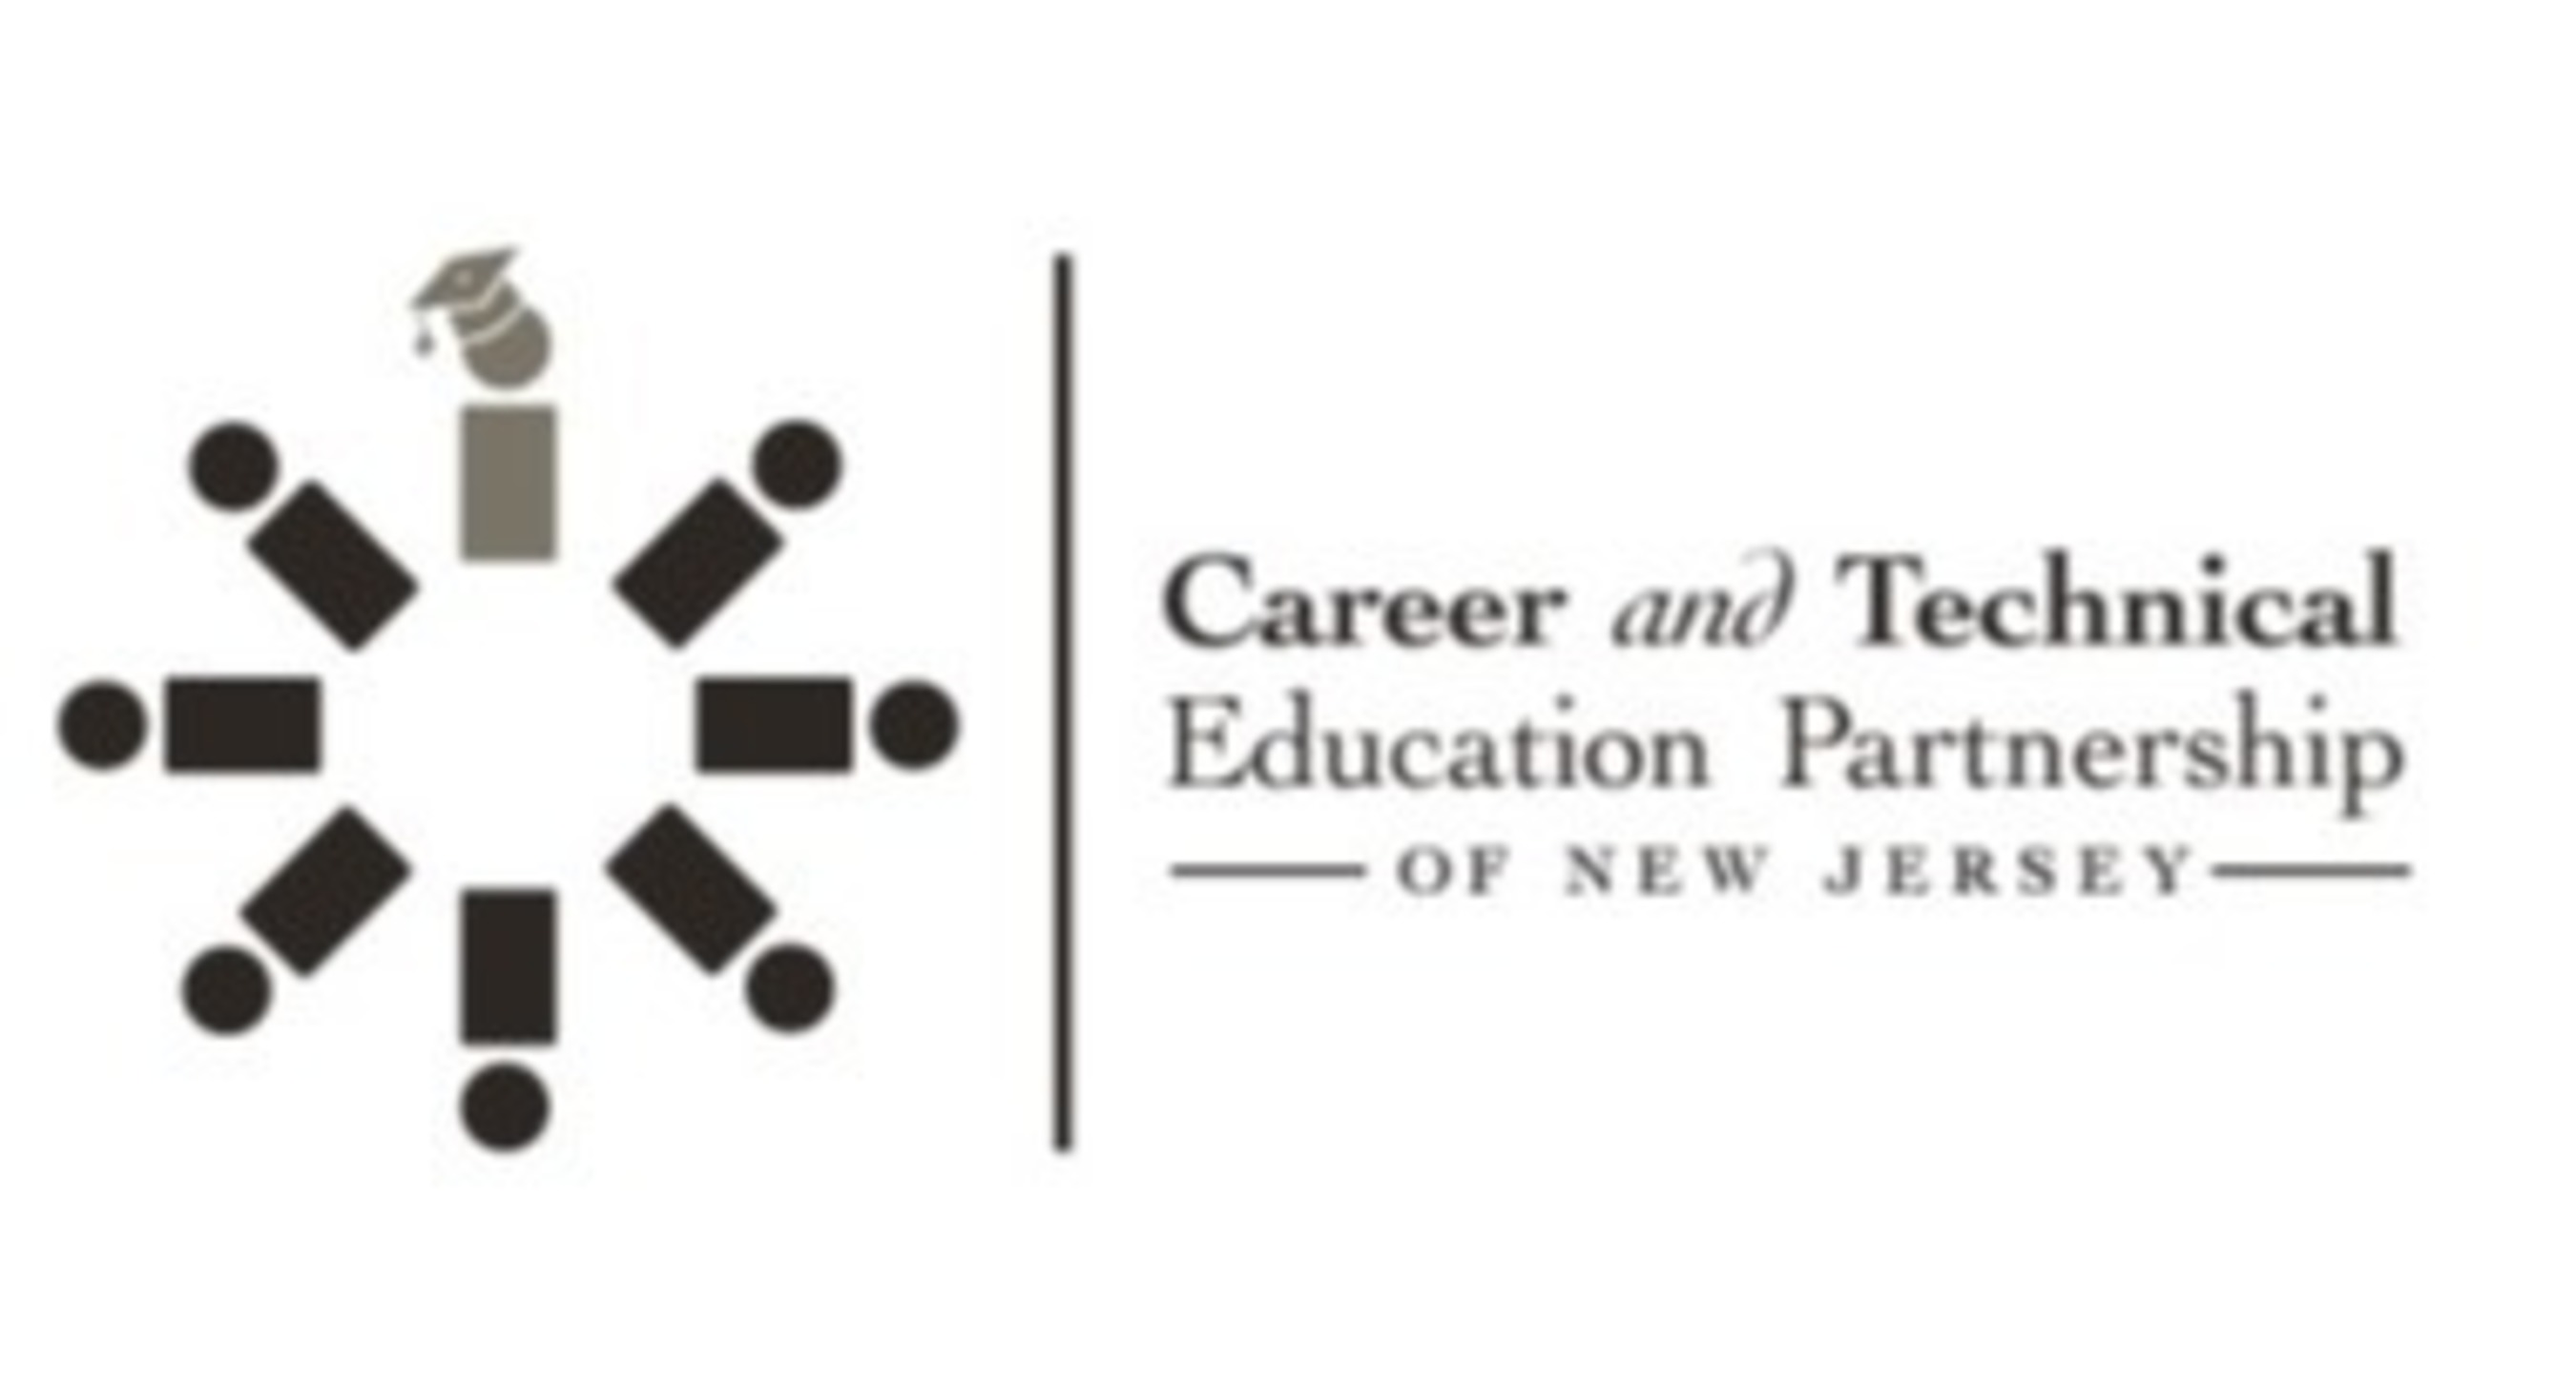 Career and Technical Education Partnership of New Jersey Logo. (PRNewsFoto/Career and Technical Education)